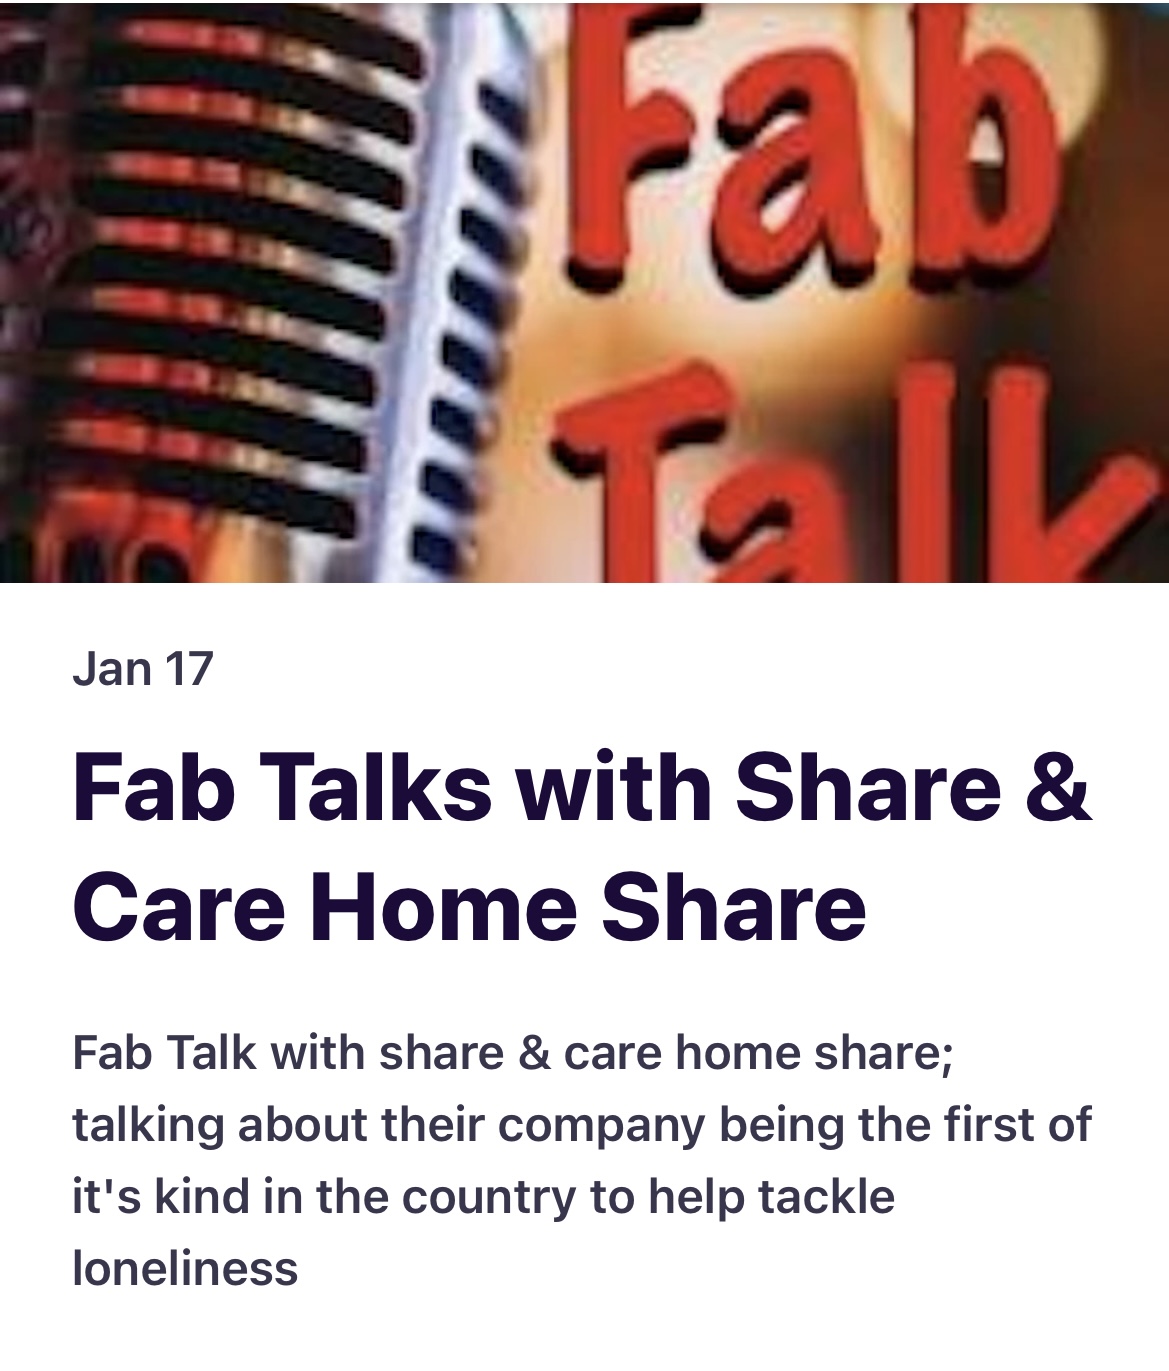 FabTalks - Share and Care Home Share featured image